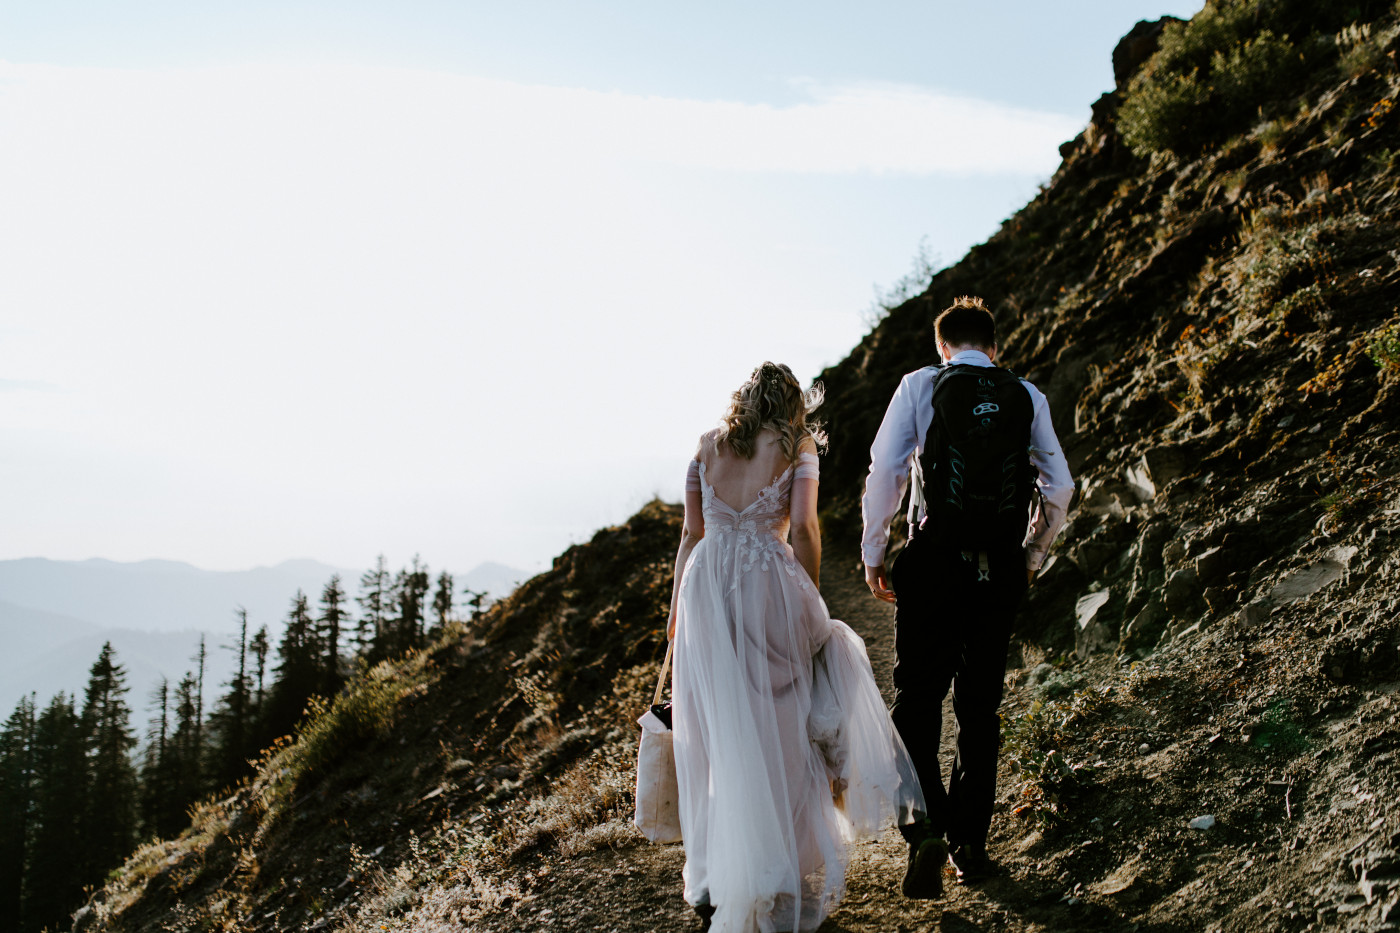 Corey and Kylie walk near a cliff in the Mount Hood National Forest.